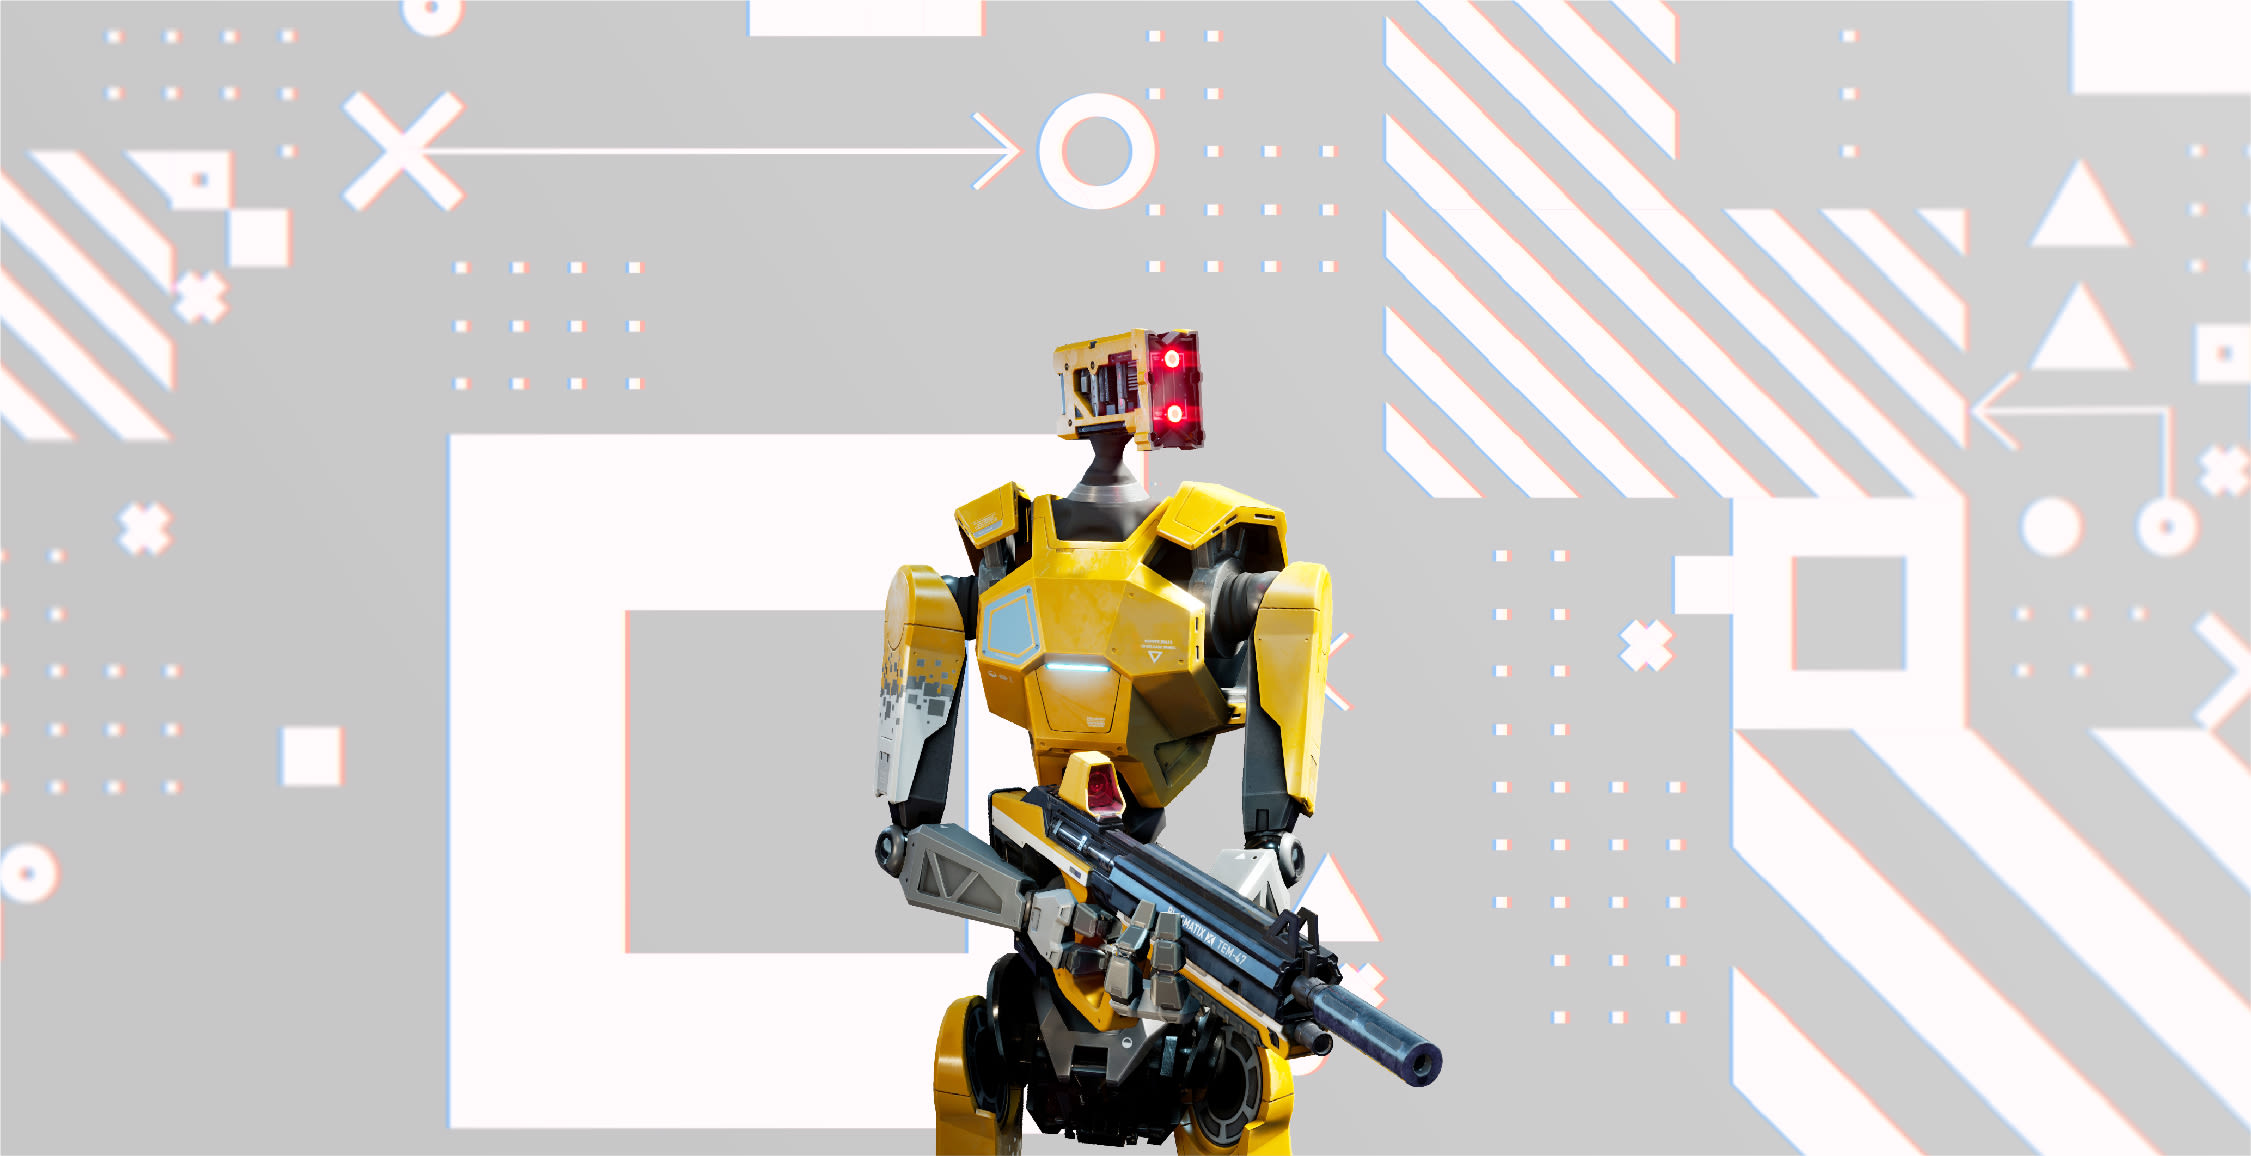 robot on light background with abstract shapes around